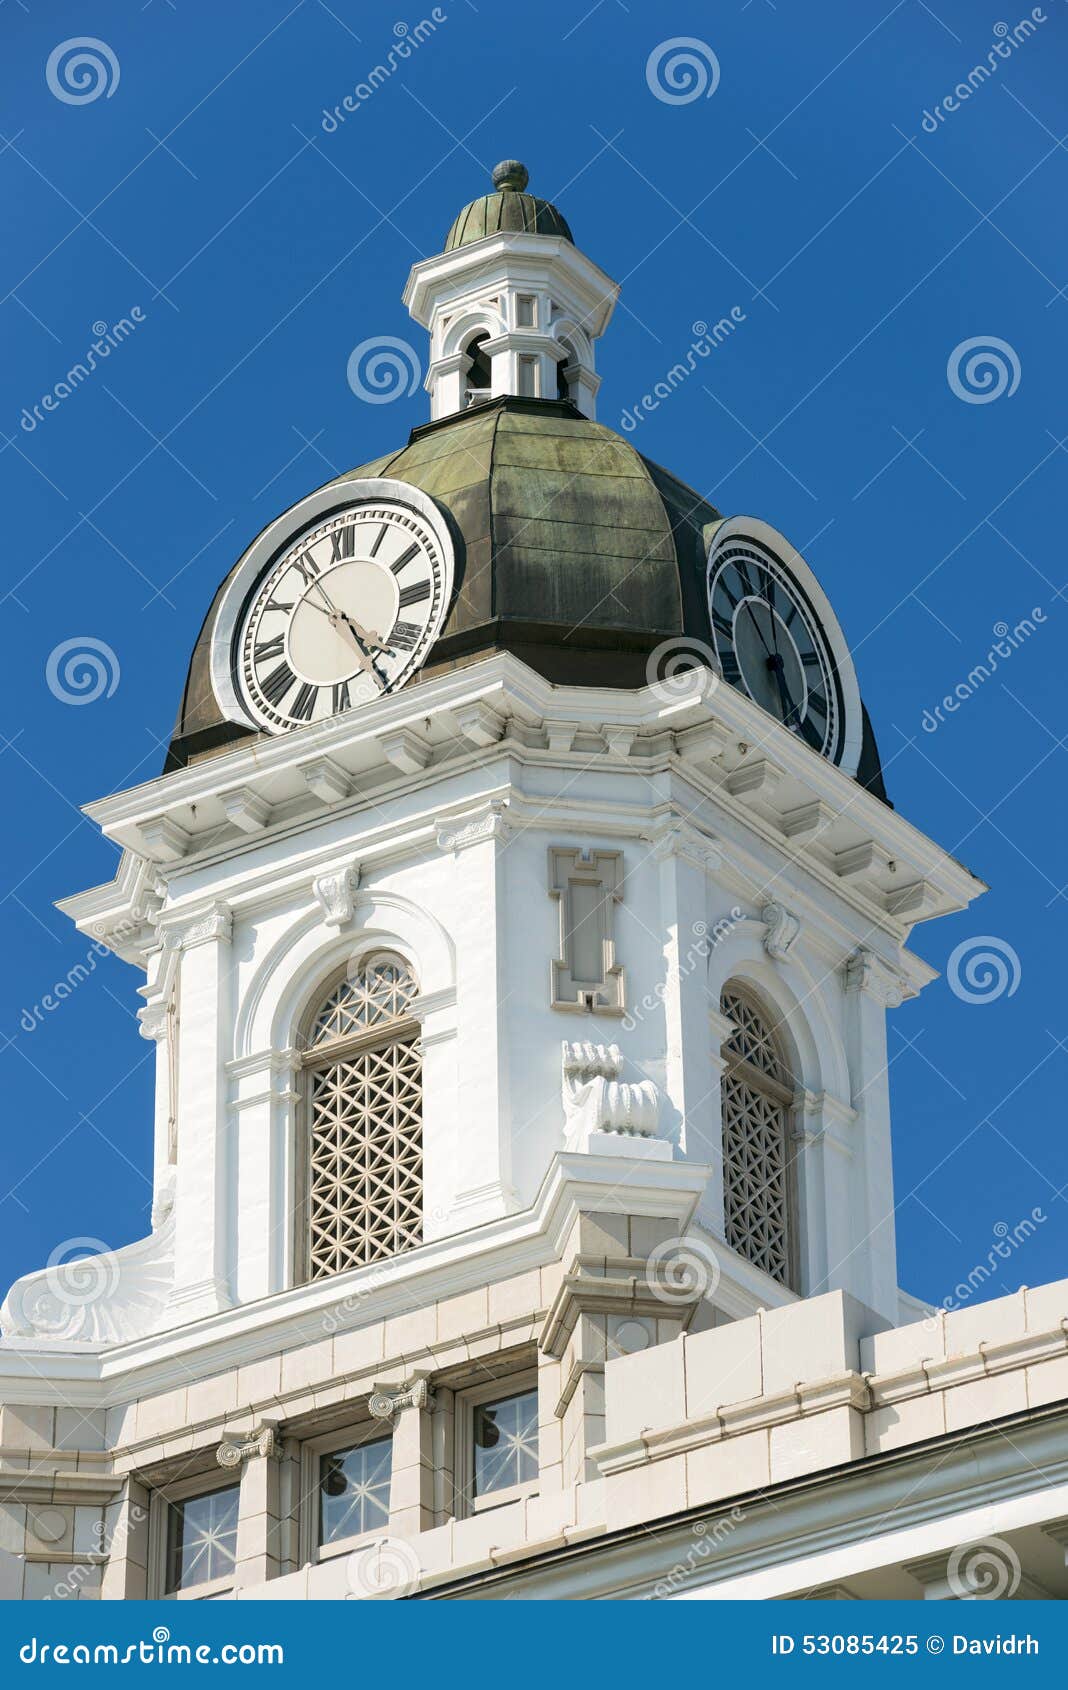 county courthouse clock tower in missoula, montana